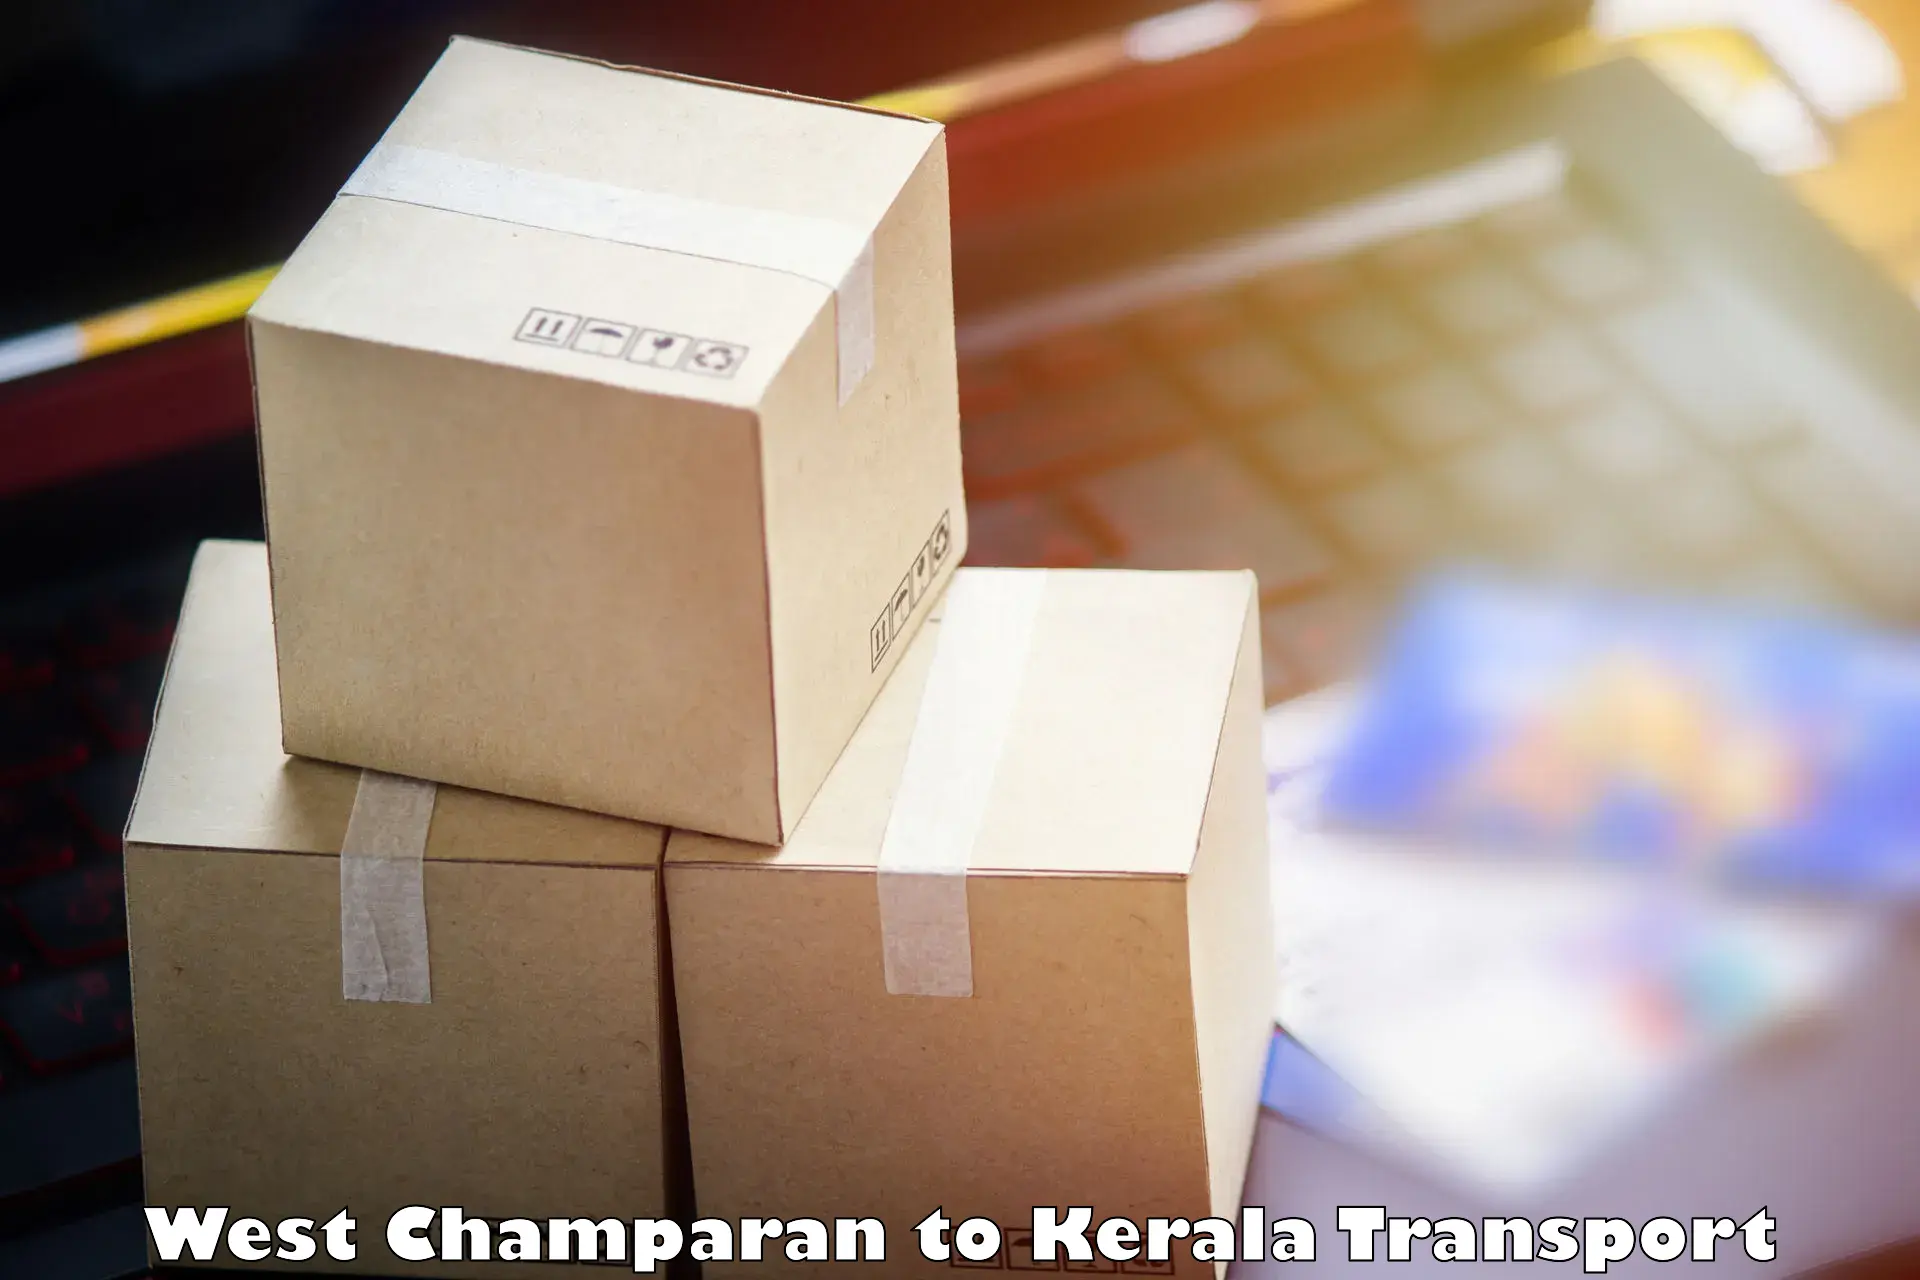 Container transport service West Champaran to Trivandrum